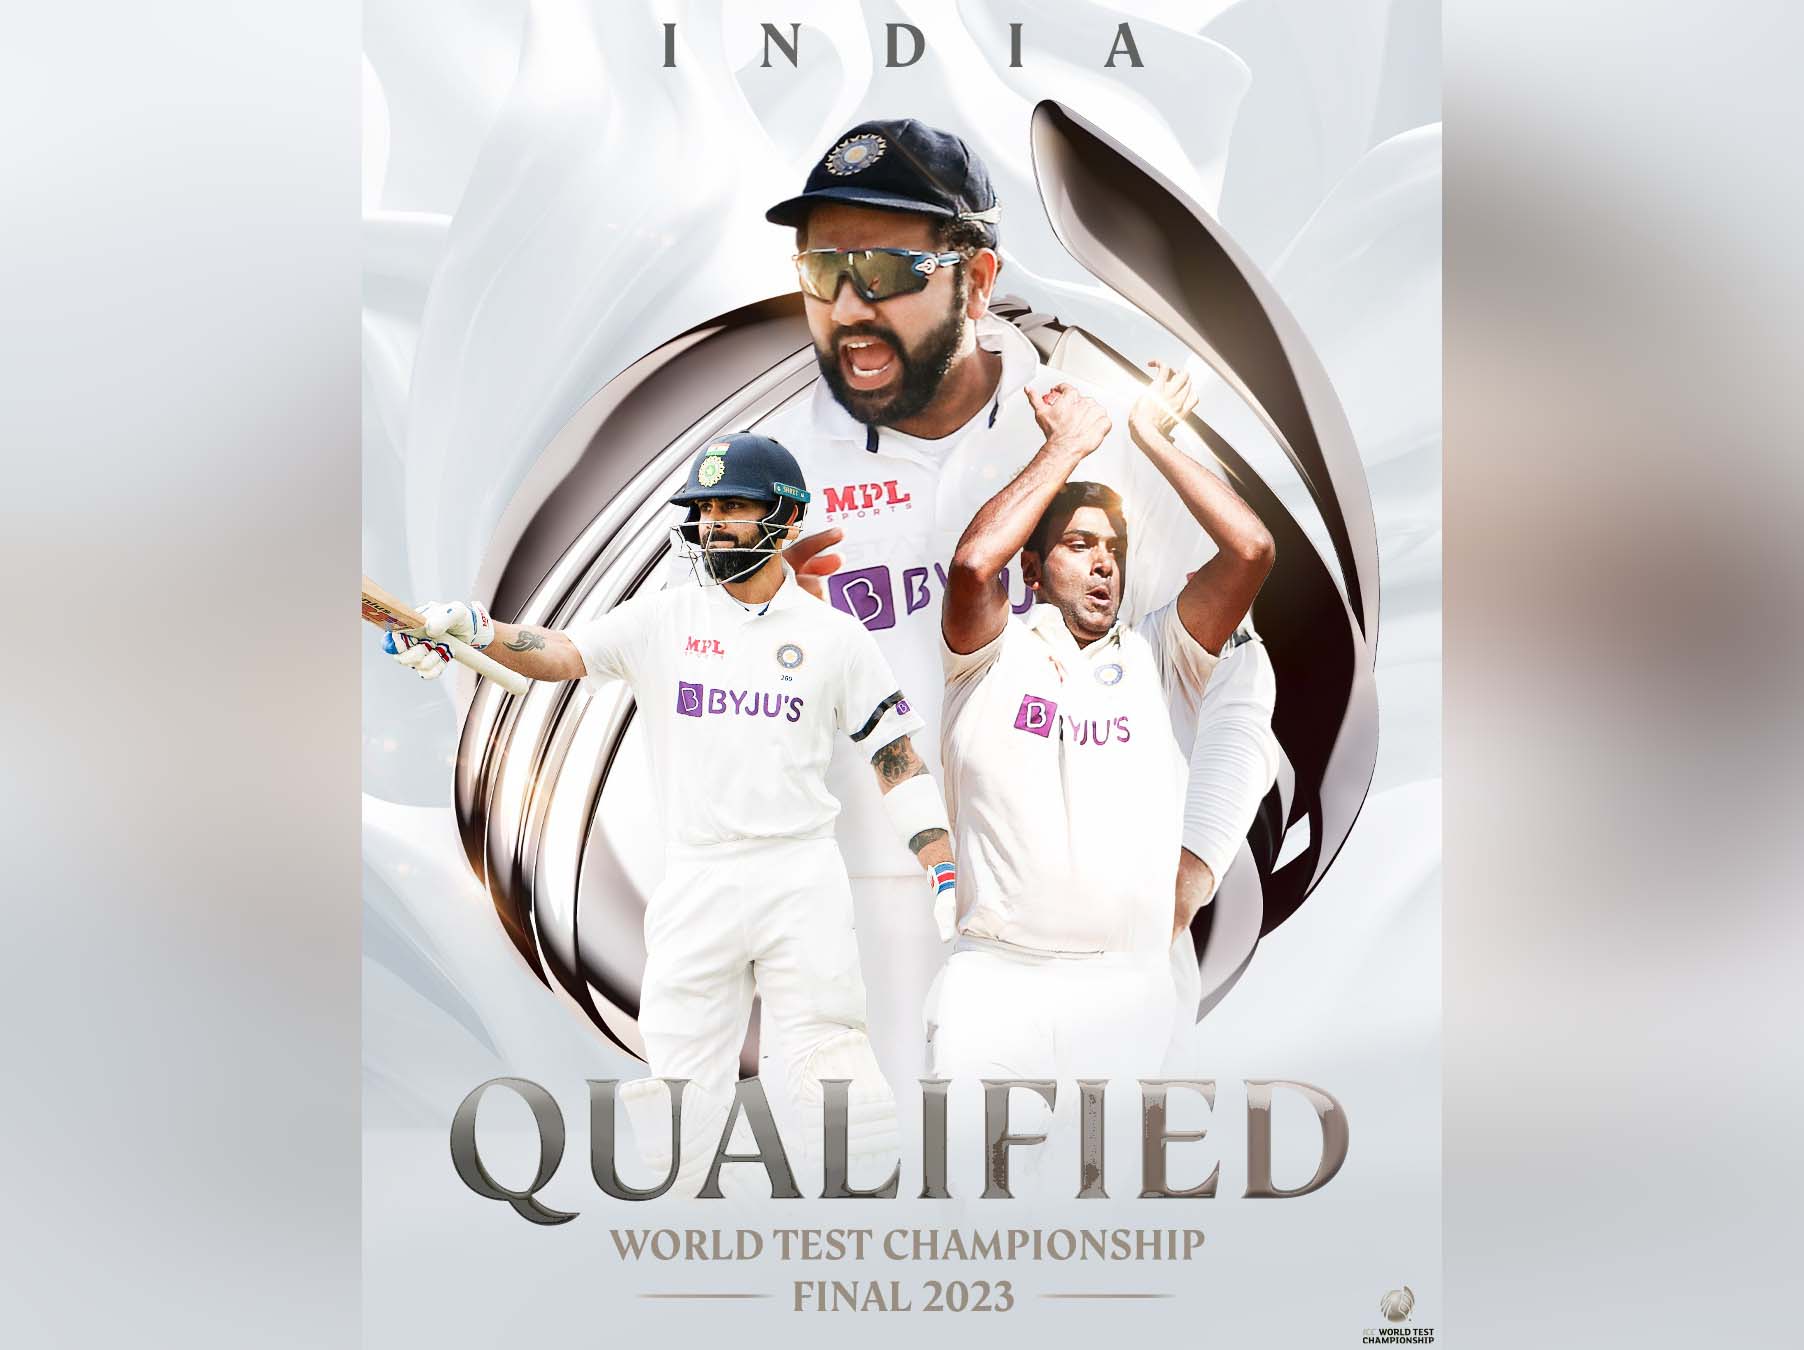 India Qualifies For World Test Championship Final, To Take On Australia At Oval